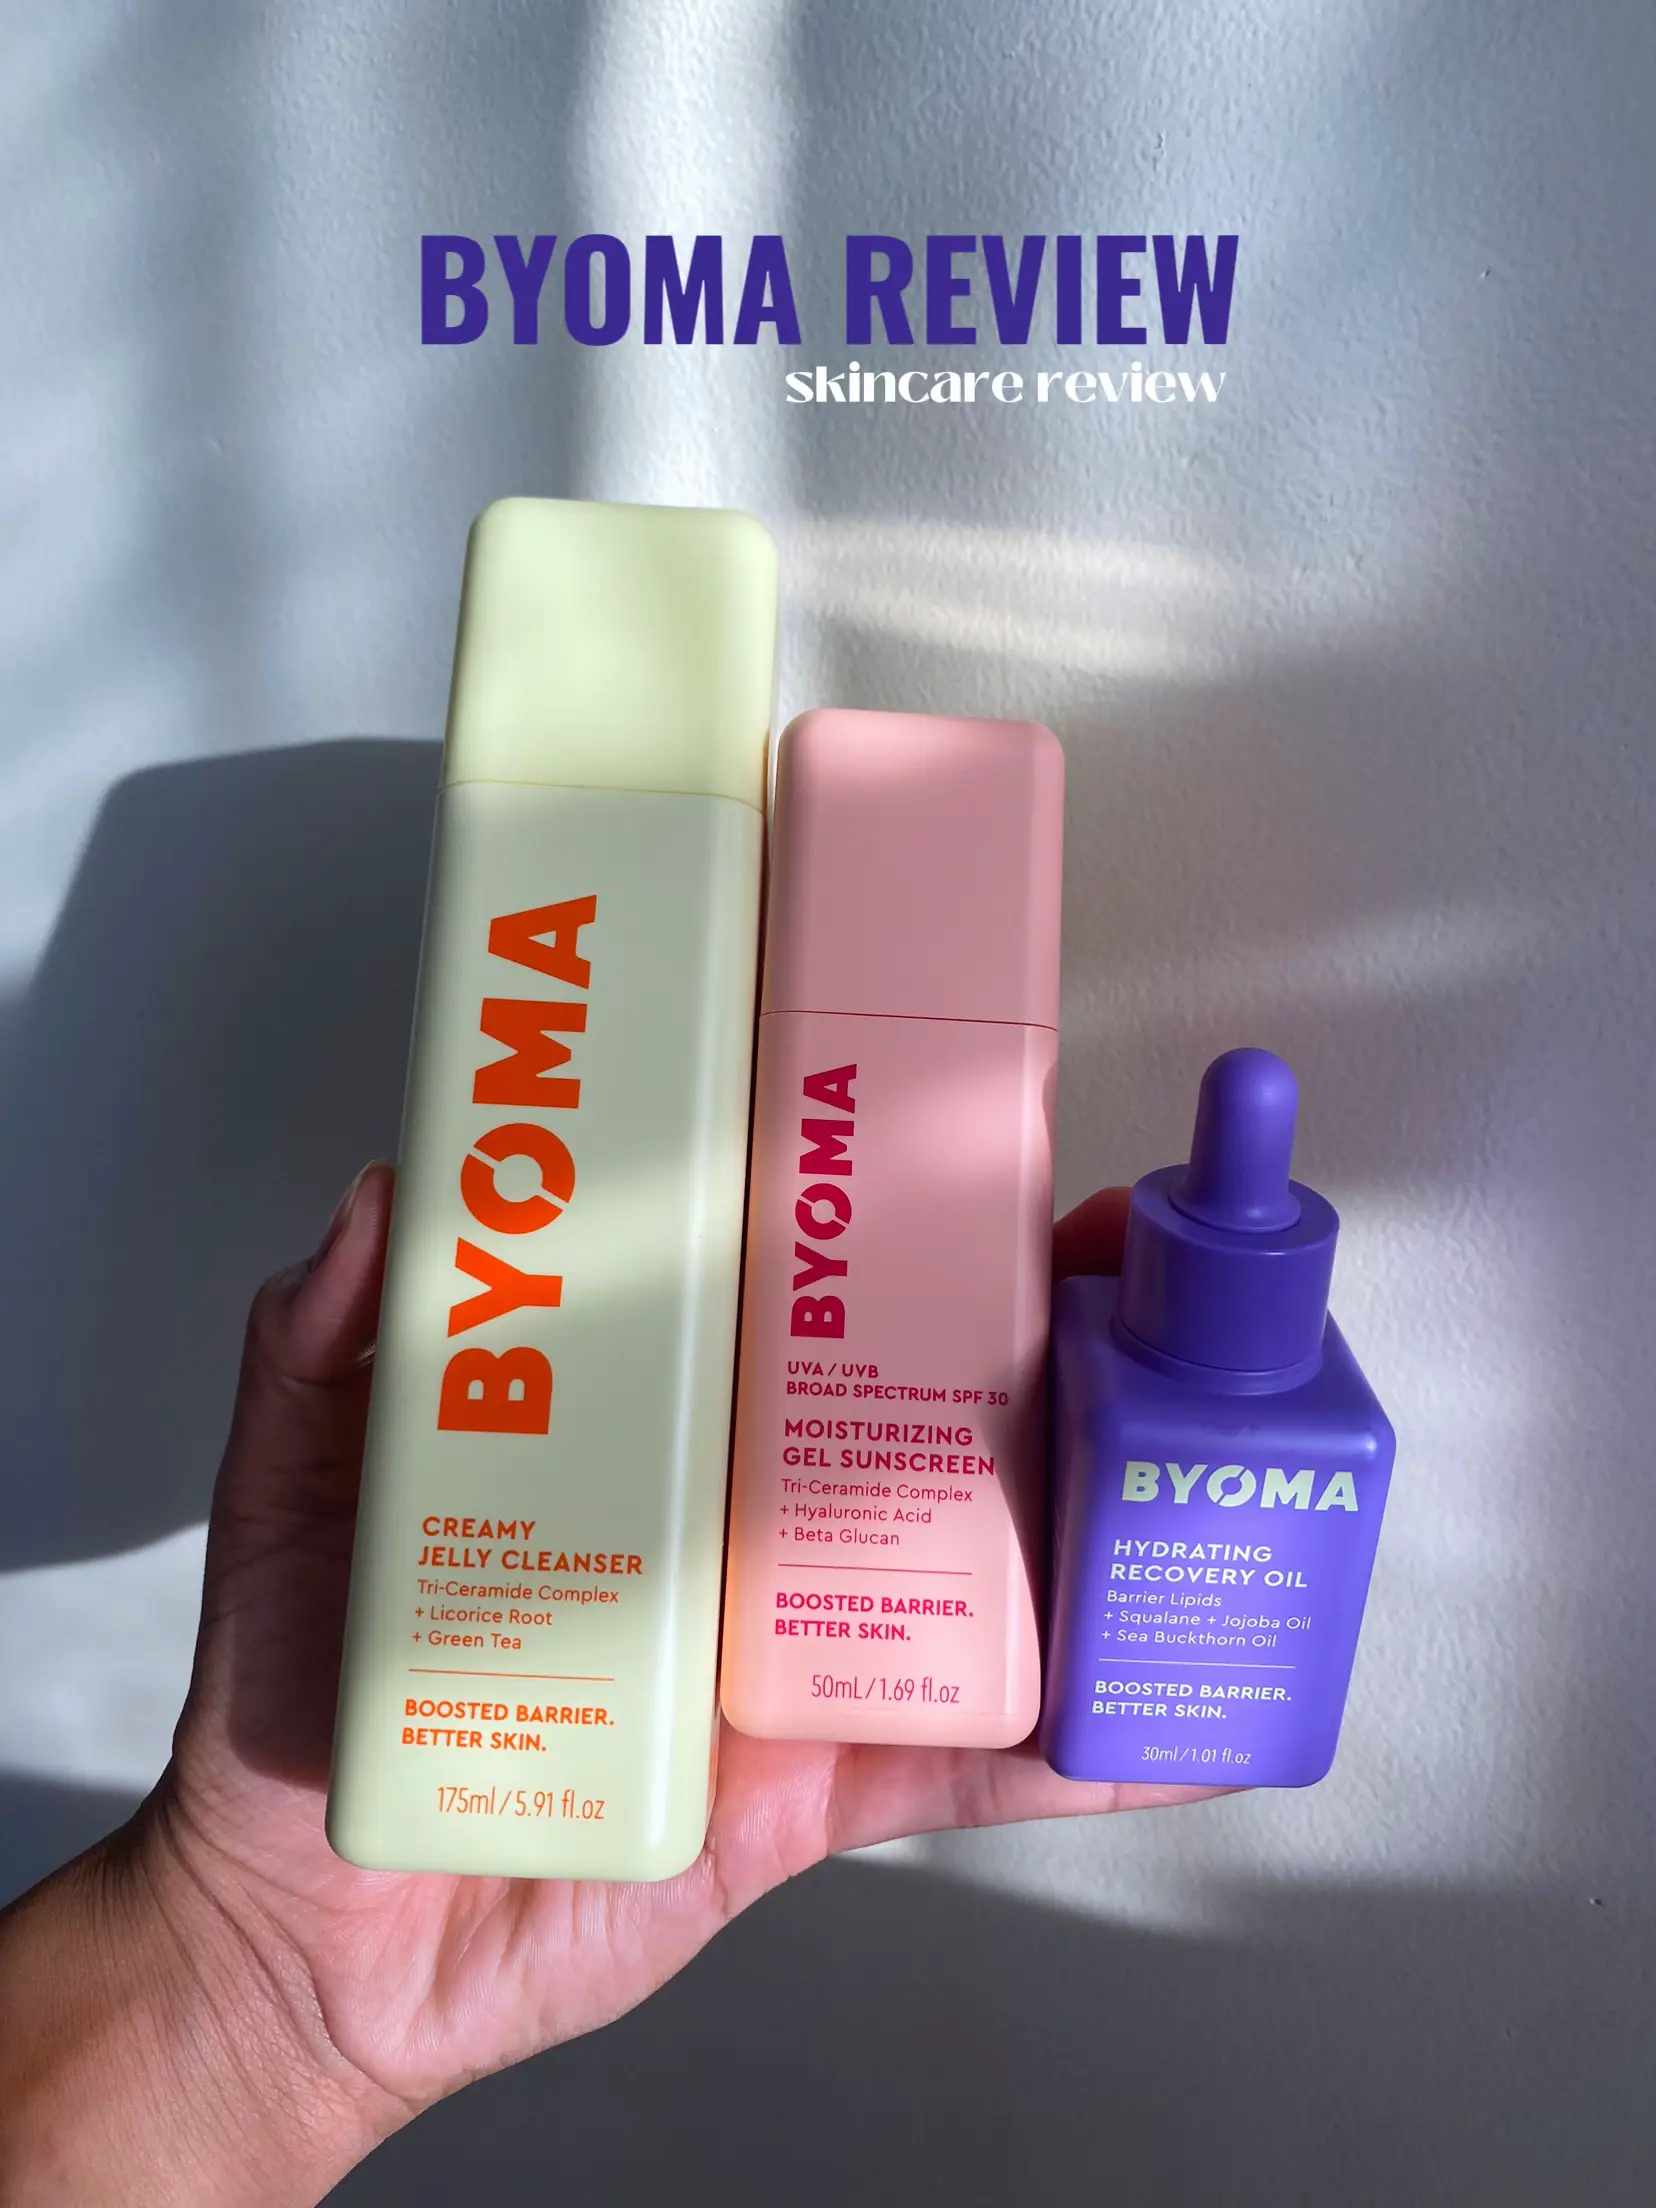 Byoma Skincare (20 products) compare prices today »